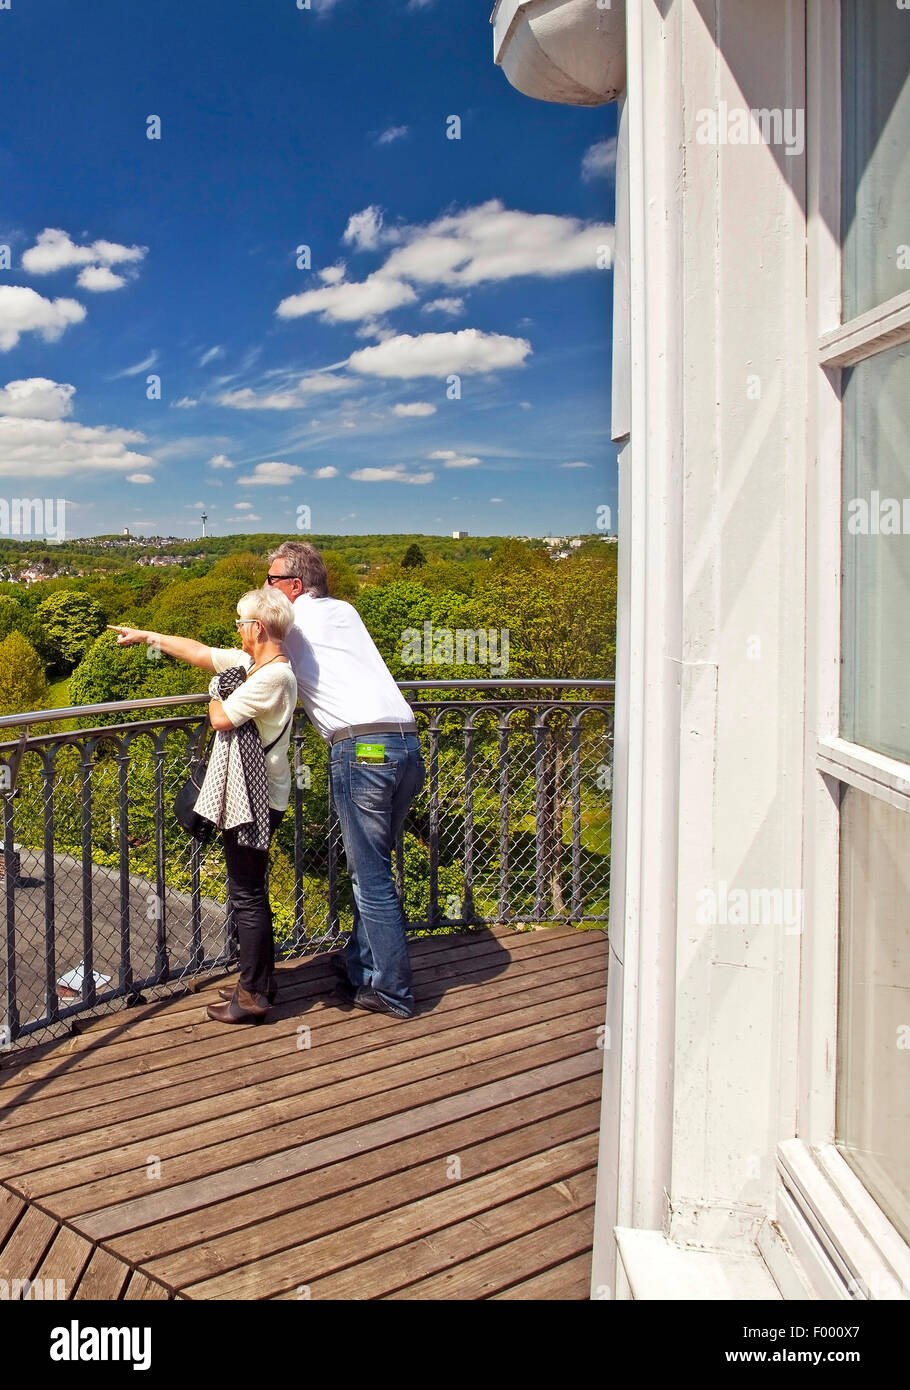 couple admiring the view from the Elisen Tower on the Botanical Gardens of Wuppertal, Germany, North Rhine-Westphalia, Bergisches Land, Wuppertal Stock Photo